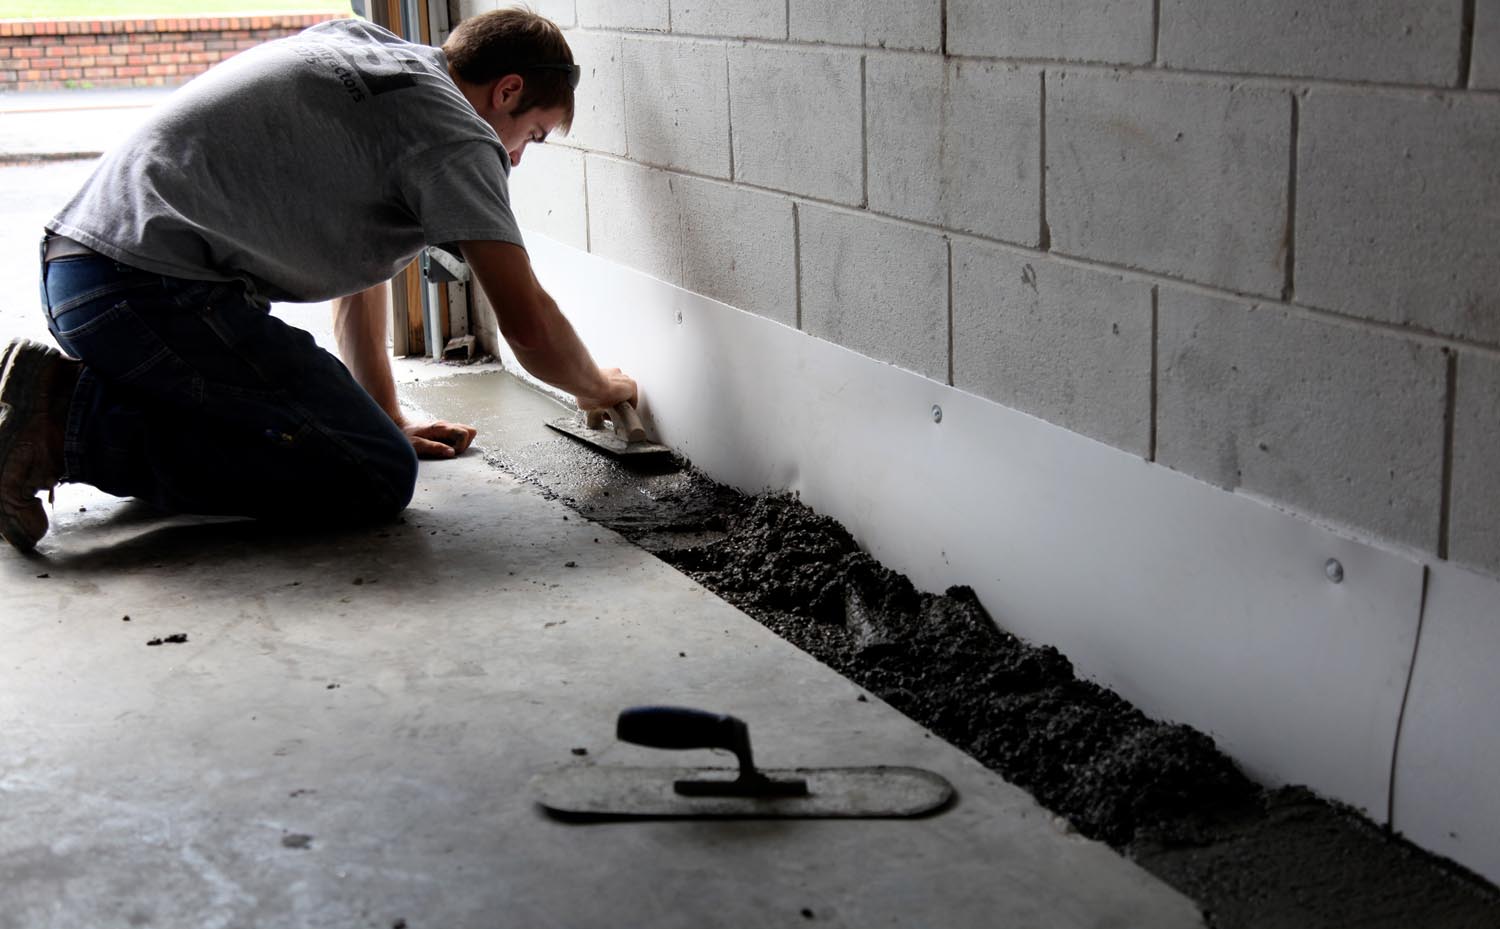 Harris Waterproofing Worker Sealing The Foundation Of A Home From The Interior, In Order To Waterproof The Basement